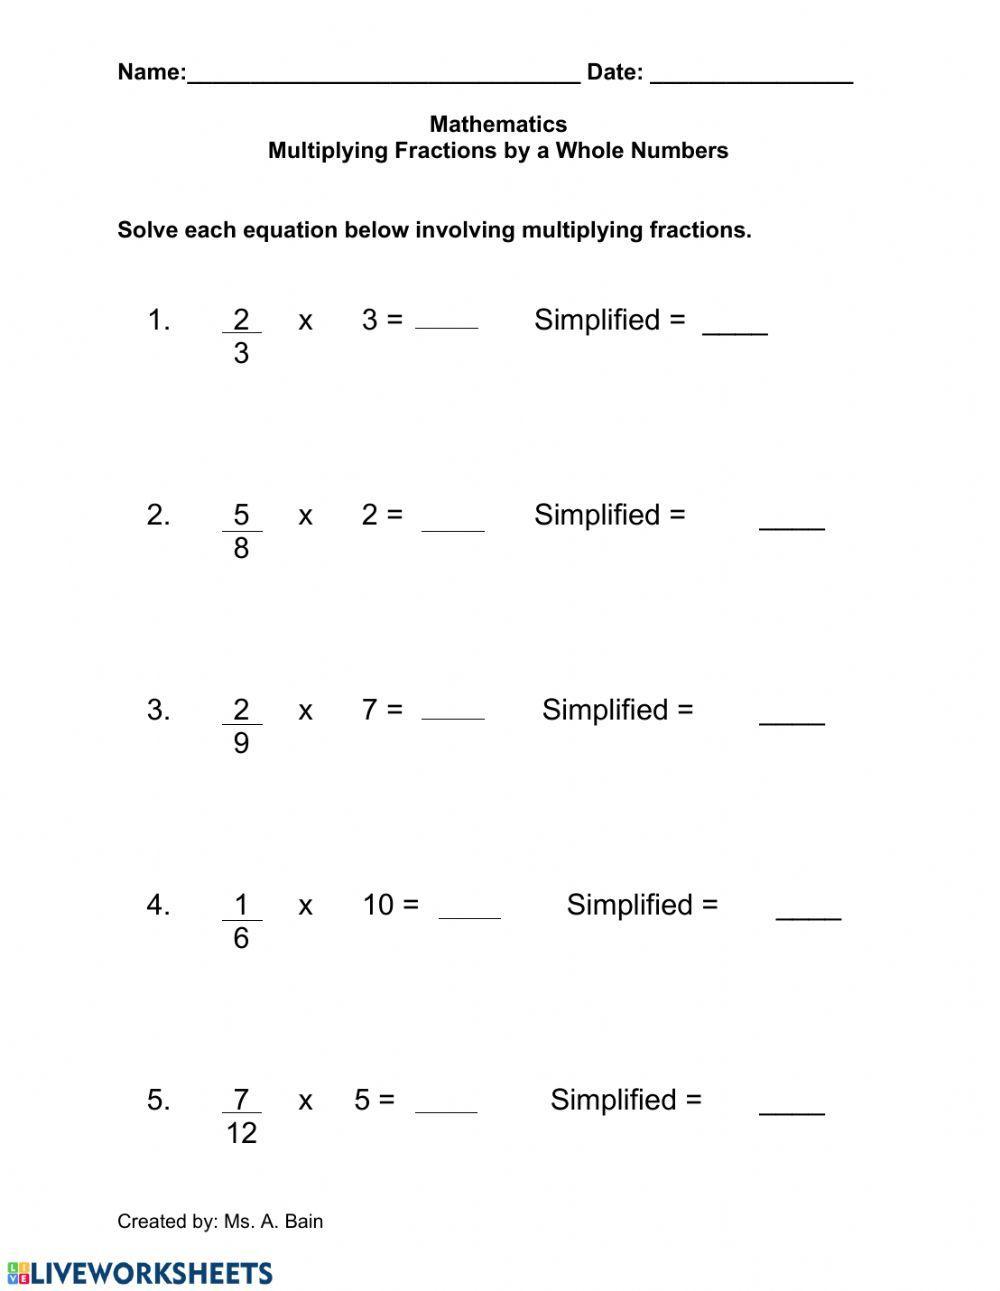 multiplying-fractions-by-a-whole-number-worksheet-live-worksheets